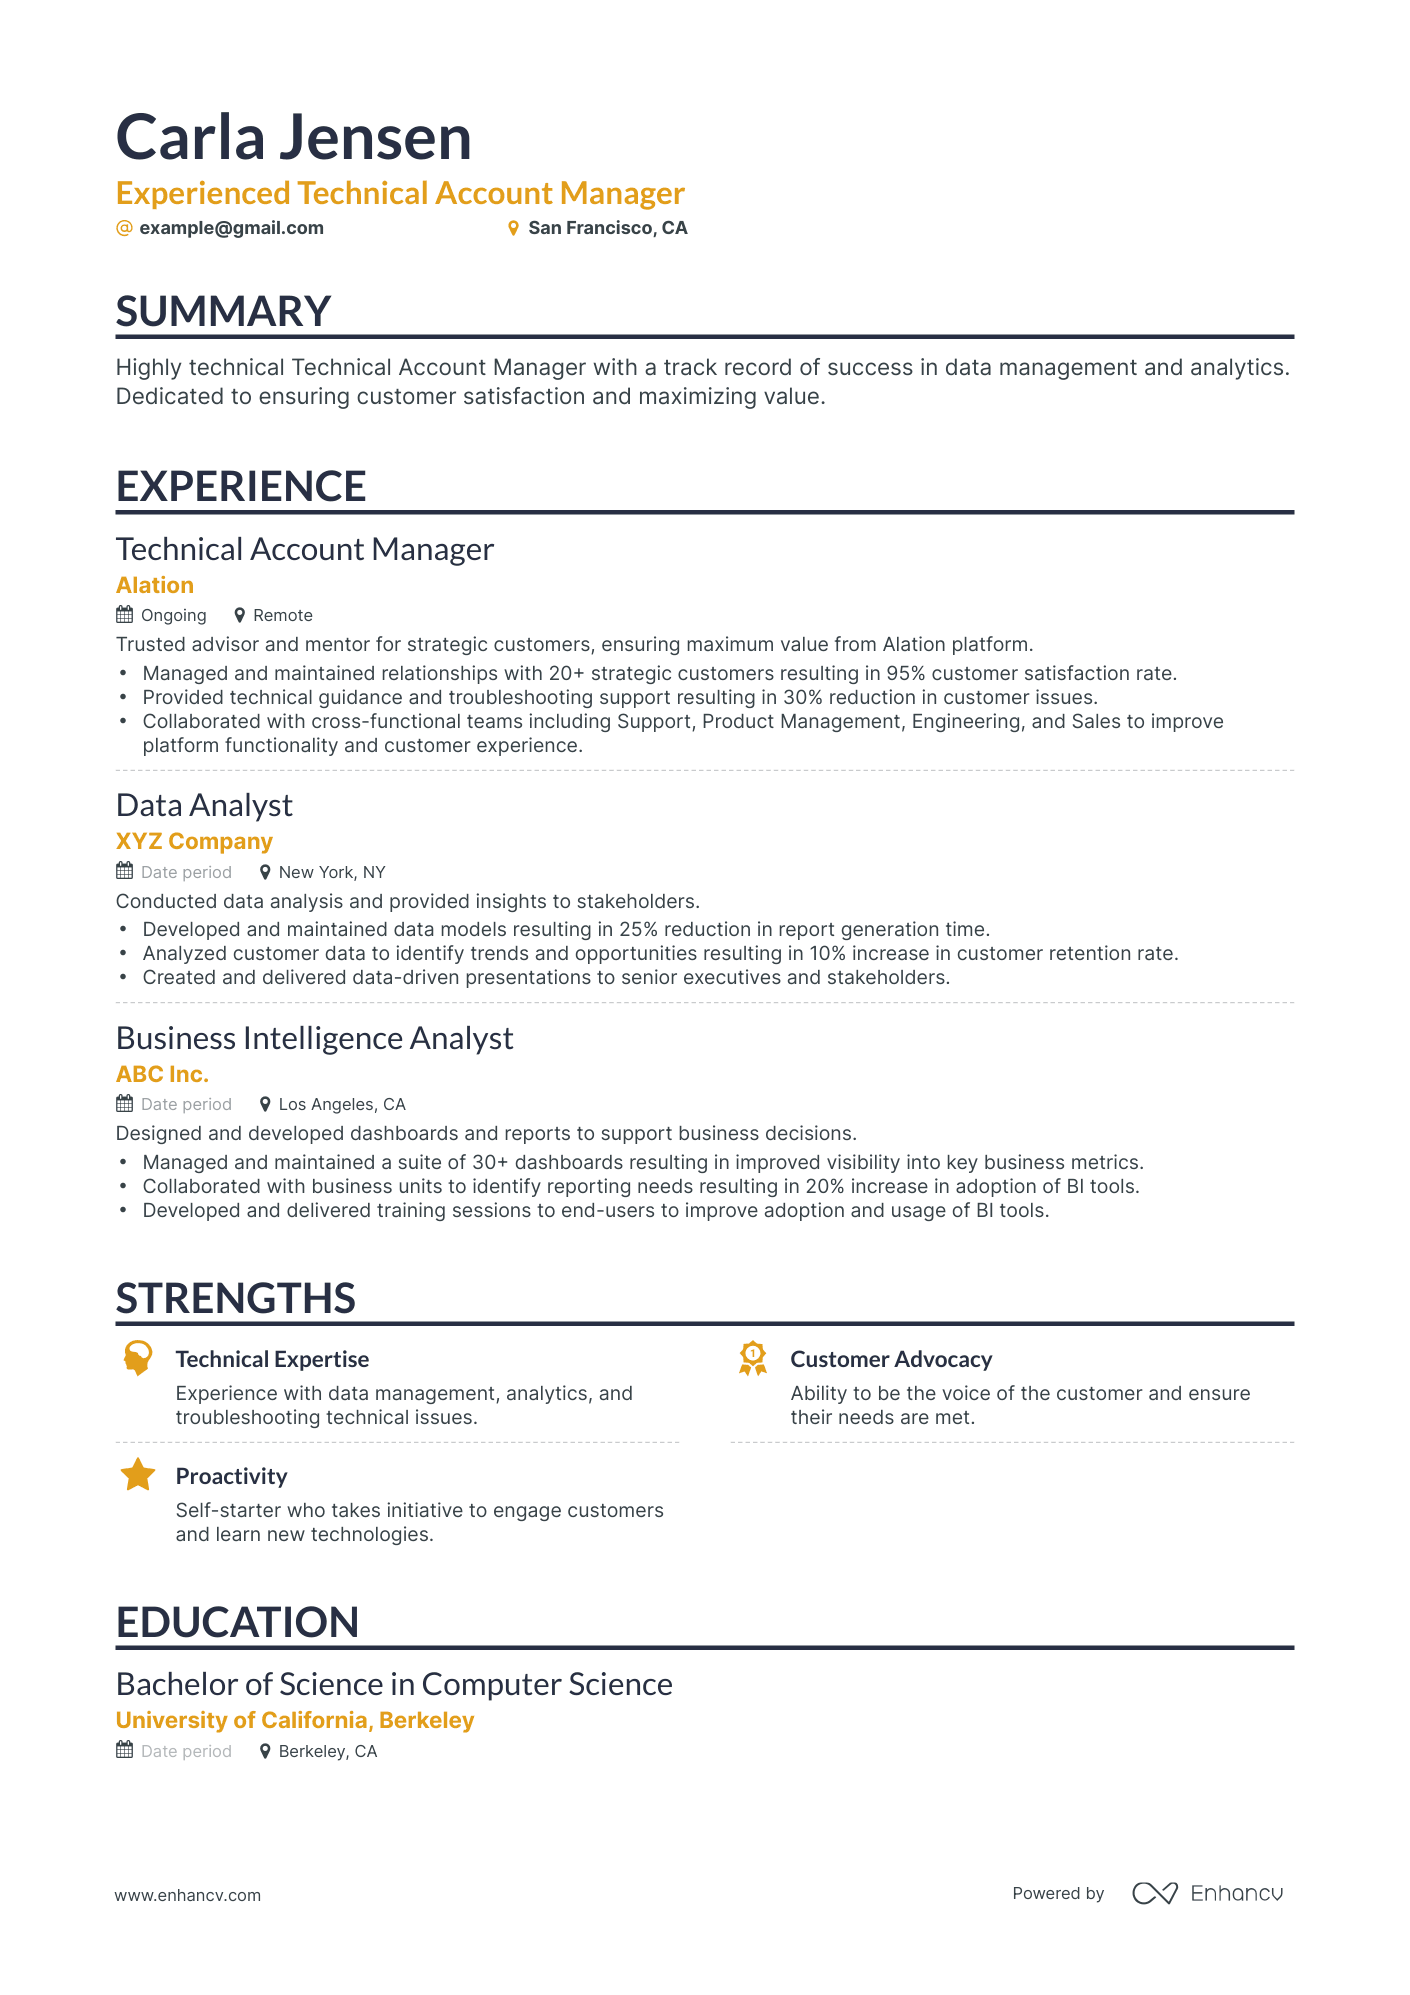 Classic Technical Account Manager Resume Template